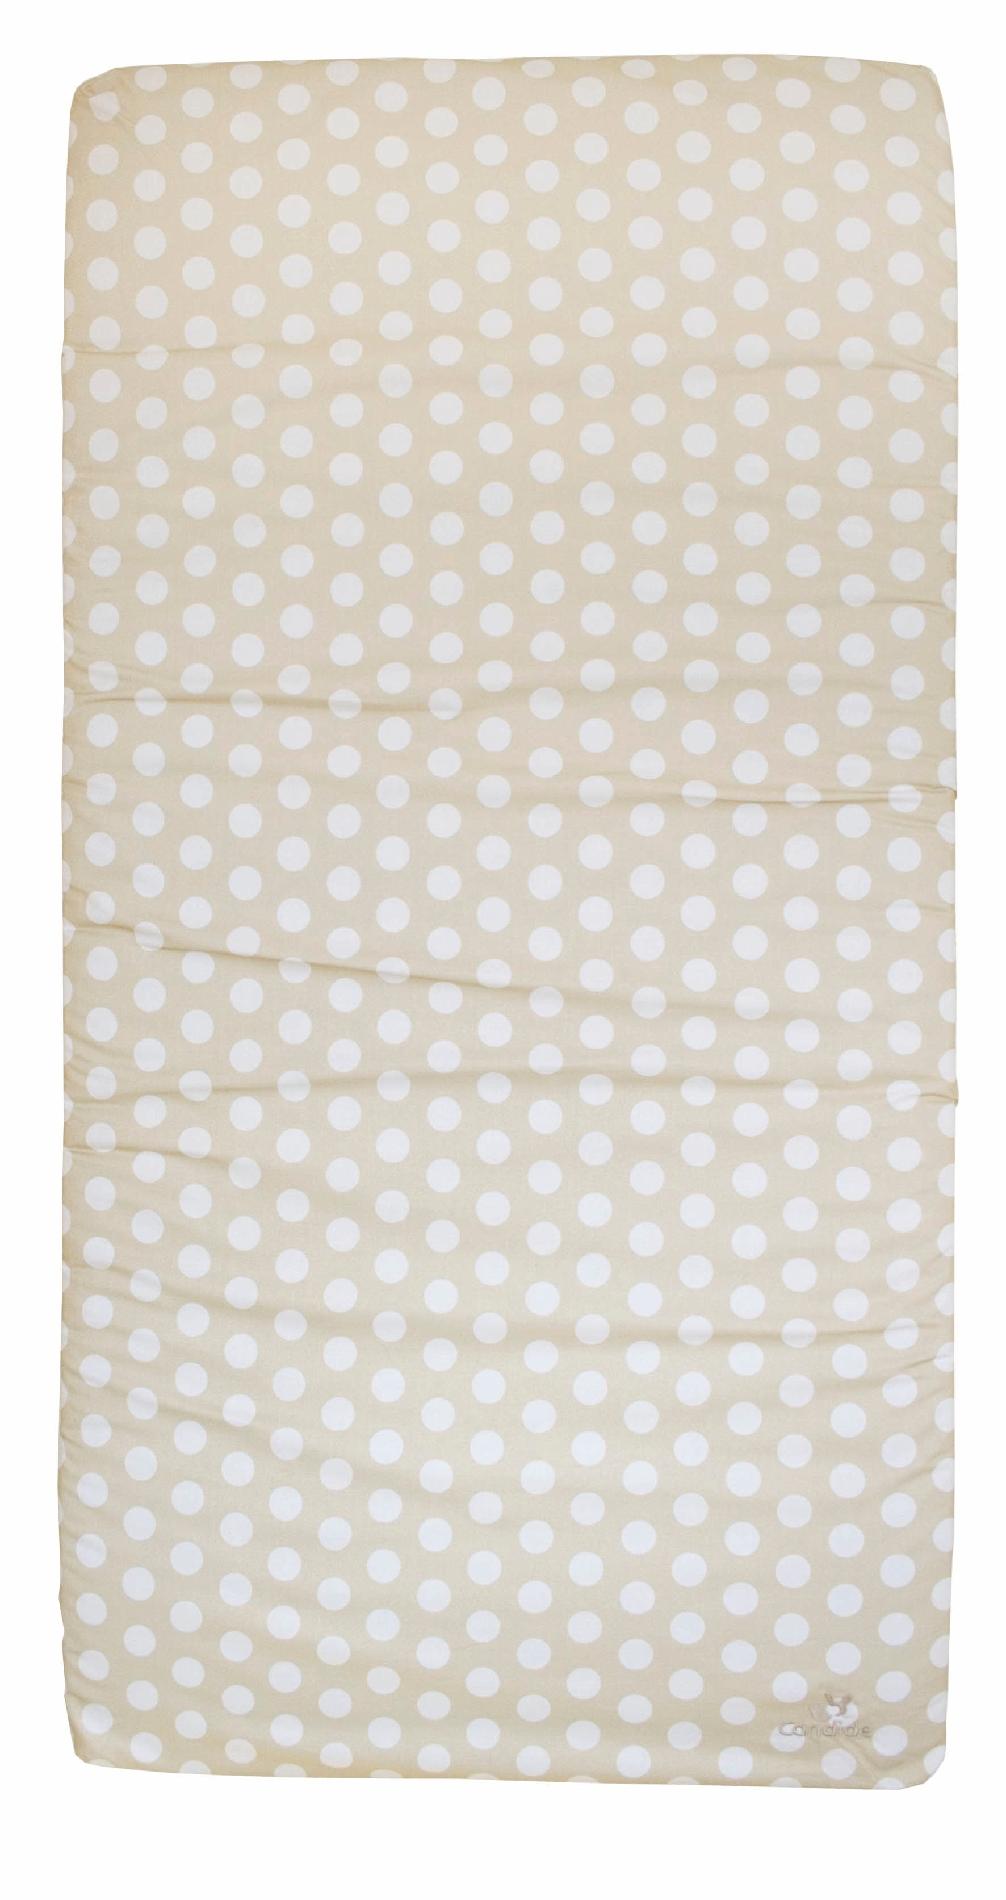 Candide Baby Play Yard / Pack N Play Portable Mattress - White with Beige Dots